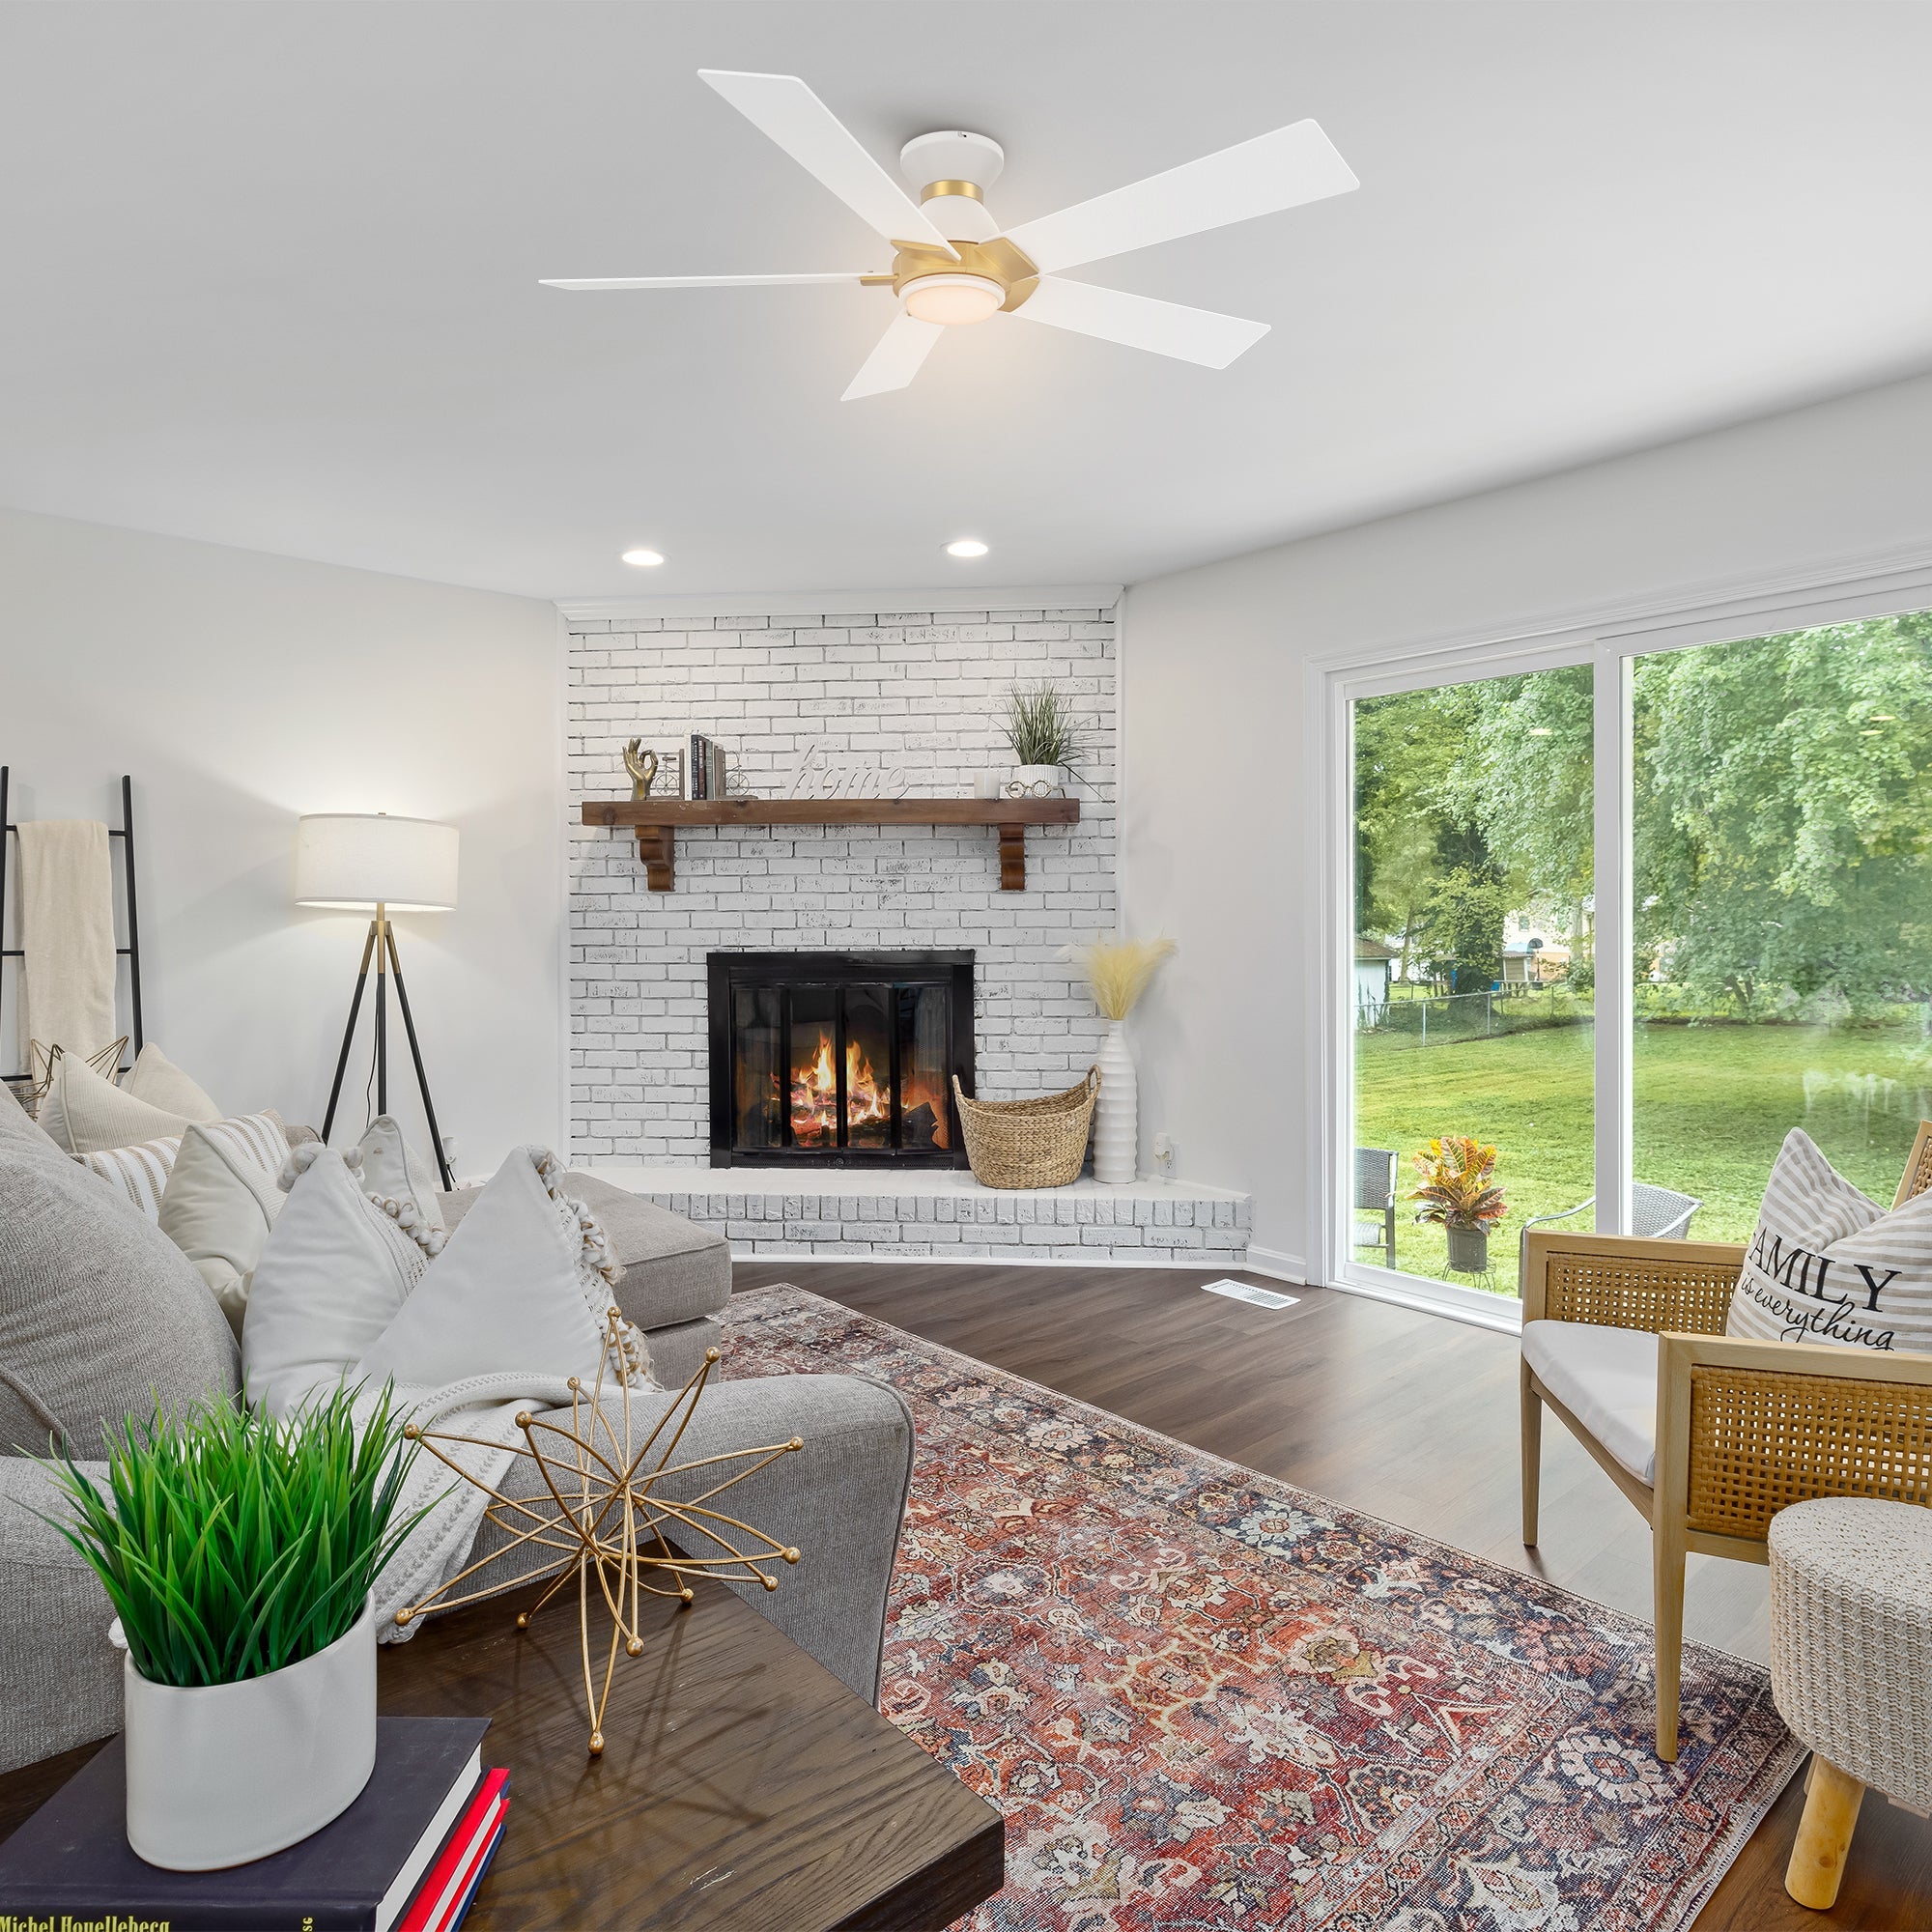 This Aspen 48'' smart ceiling fan keeps your space cool, bright, and stylish. It is a soft modern masterpiece perfect for your large indoor living spaces. This Wifi smart ceiling fan is a simplicity designing with White finish, use elegant Plywood blades and has an integrated 4000K LED cool light. The fan features Remote control, Wi-Fi apps, Siri Shortcut and Voice control technology (compatible with Amazon Alexa and Google Home Assistant ) to set fan preferences. #color_white